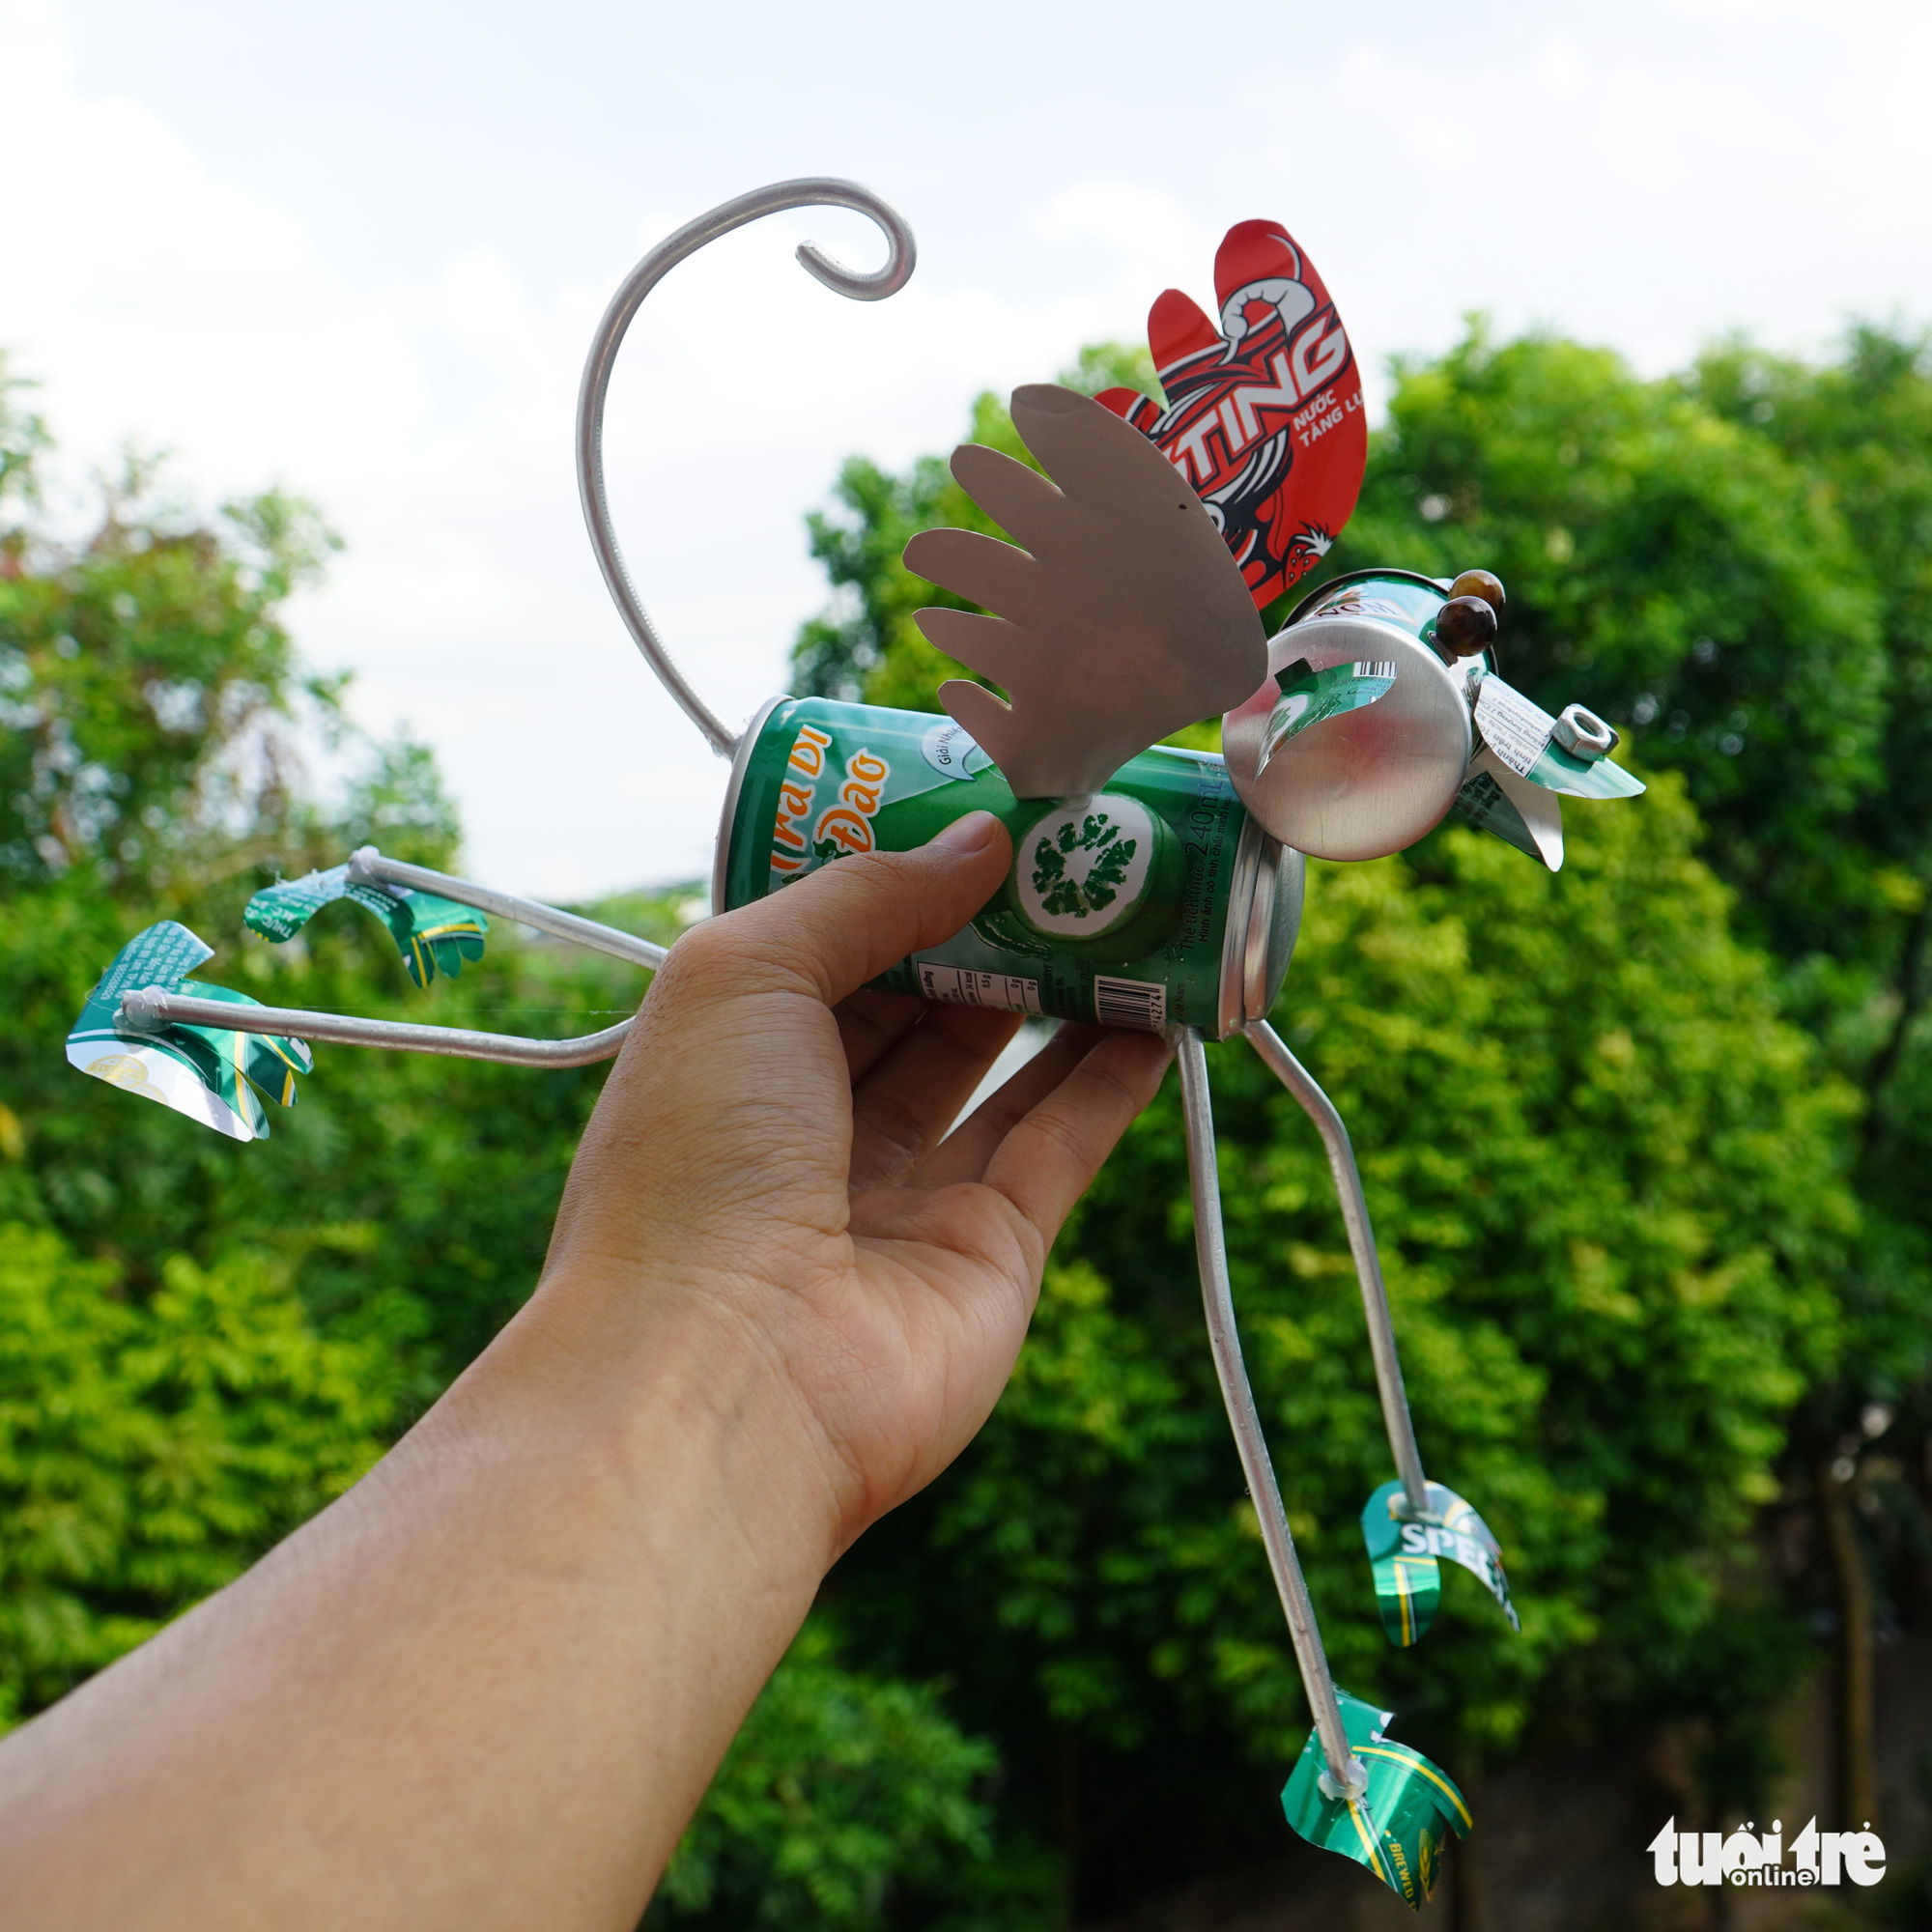 A toy animal made from recycled materials by Luu Chung Nghia is seen in this photo. Photo: Duong Lieu / Tuoi Tre